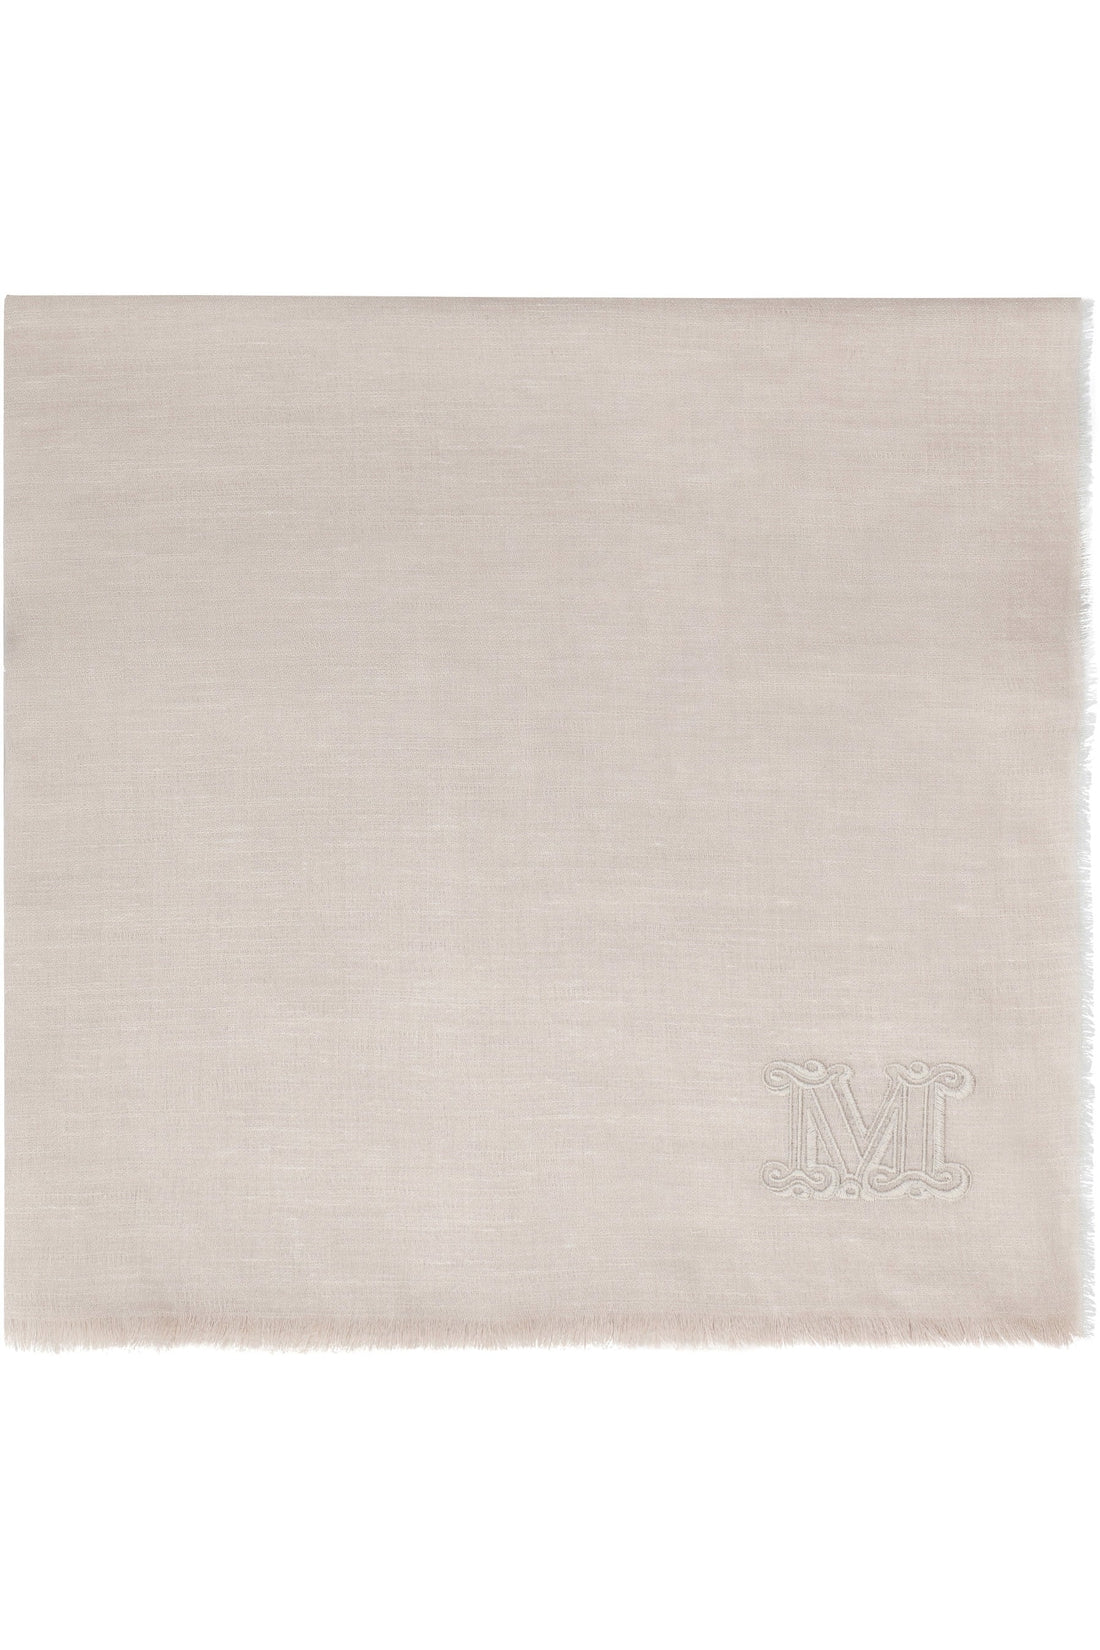 Max Mara-OUTLET-SALE-Wool and silk scarf-ARCHIVIST